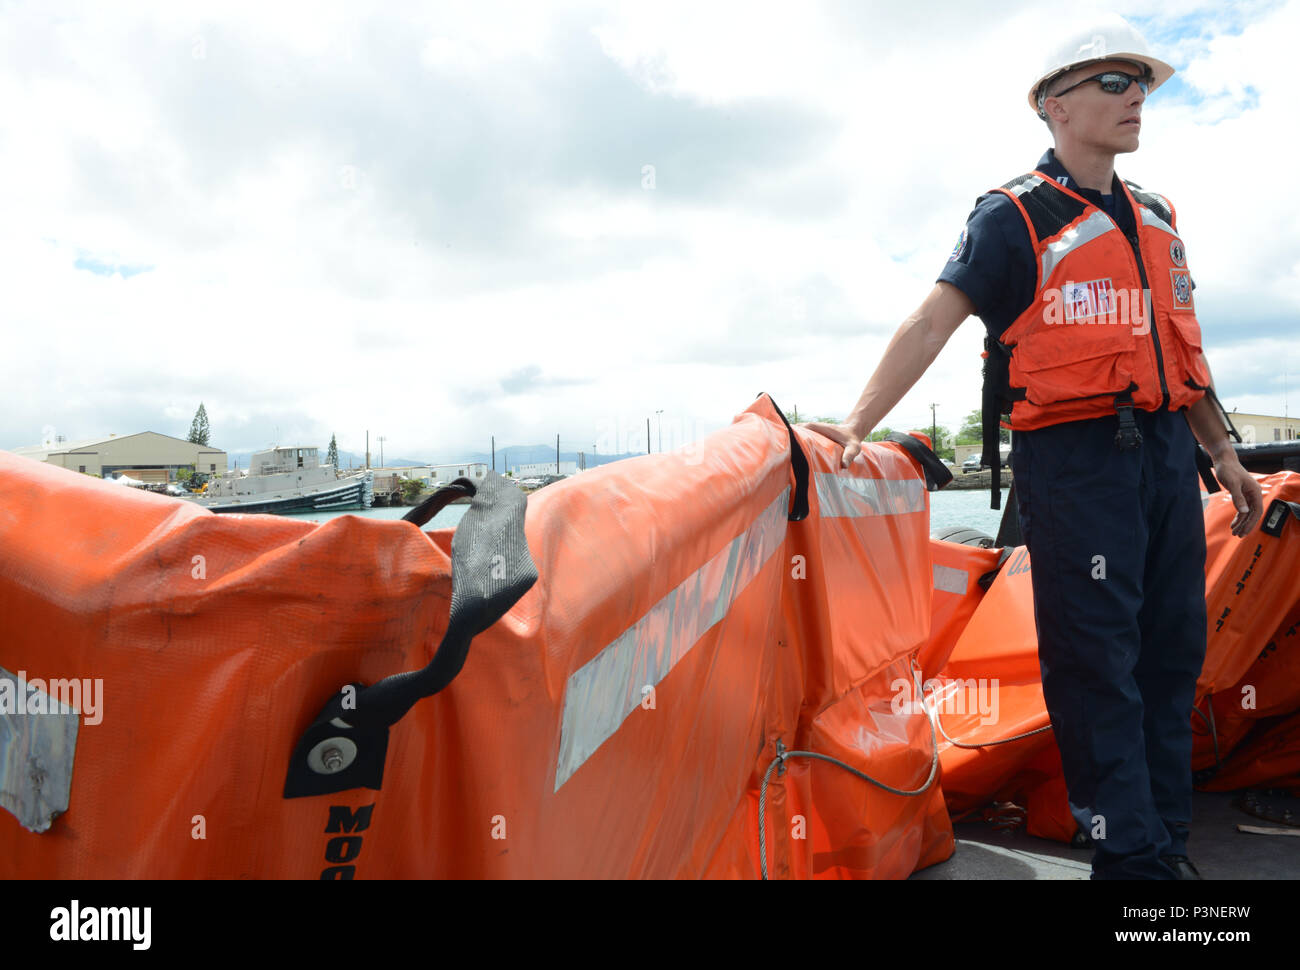 160713-G-XD768-006 JOINT BASE PEARL HARBOR-HICKAM (July 13, 2016) Lt. Tim Jones from the Coast Guard 14th District Response Advisory Team prepares to deploy boom during a training evolution to assemble, deploy and operate a Vessel of Opportunity Skimming System aboard the Tug Noha Loa during Rim of the Pacific Exercise 2016. The VOSS is a portable side-skimming oil-recovery system, which can be deployed from most work vessels over 65 feet in length. Twenty-six nations, 49 ships, six submarines, about 200 aircraft, and 25-000 personnel are participating in RIMPAC from June 29 to Aug. 4 in and a Stock Photo